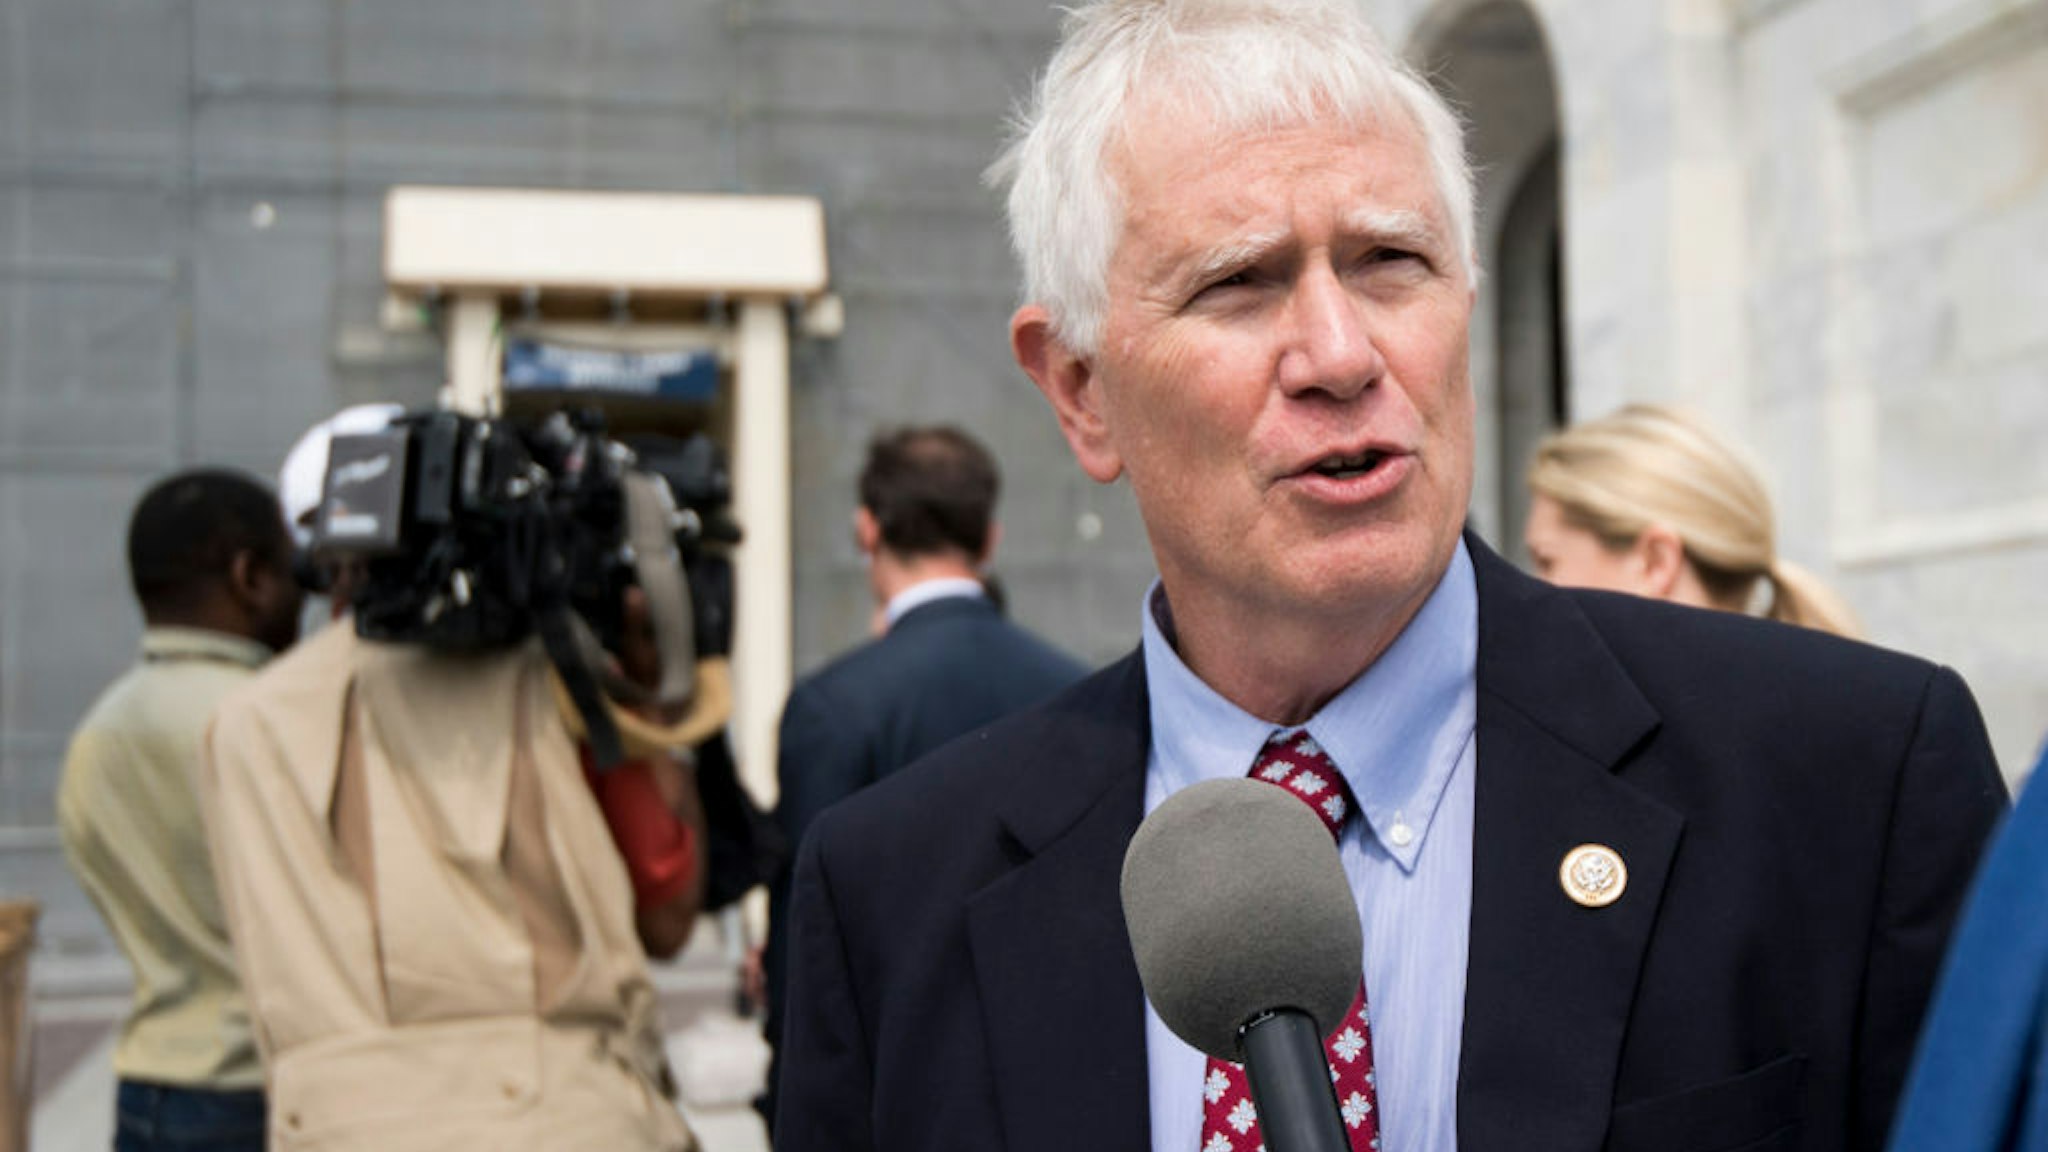 Rep. Mo Brooks, R-Ala., speaks with a reporter as he leaves the Capitol after the final vote of the week